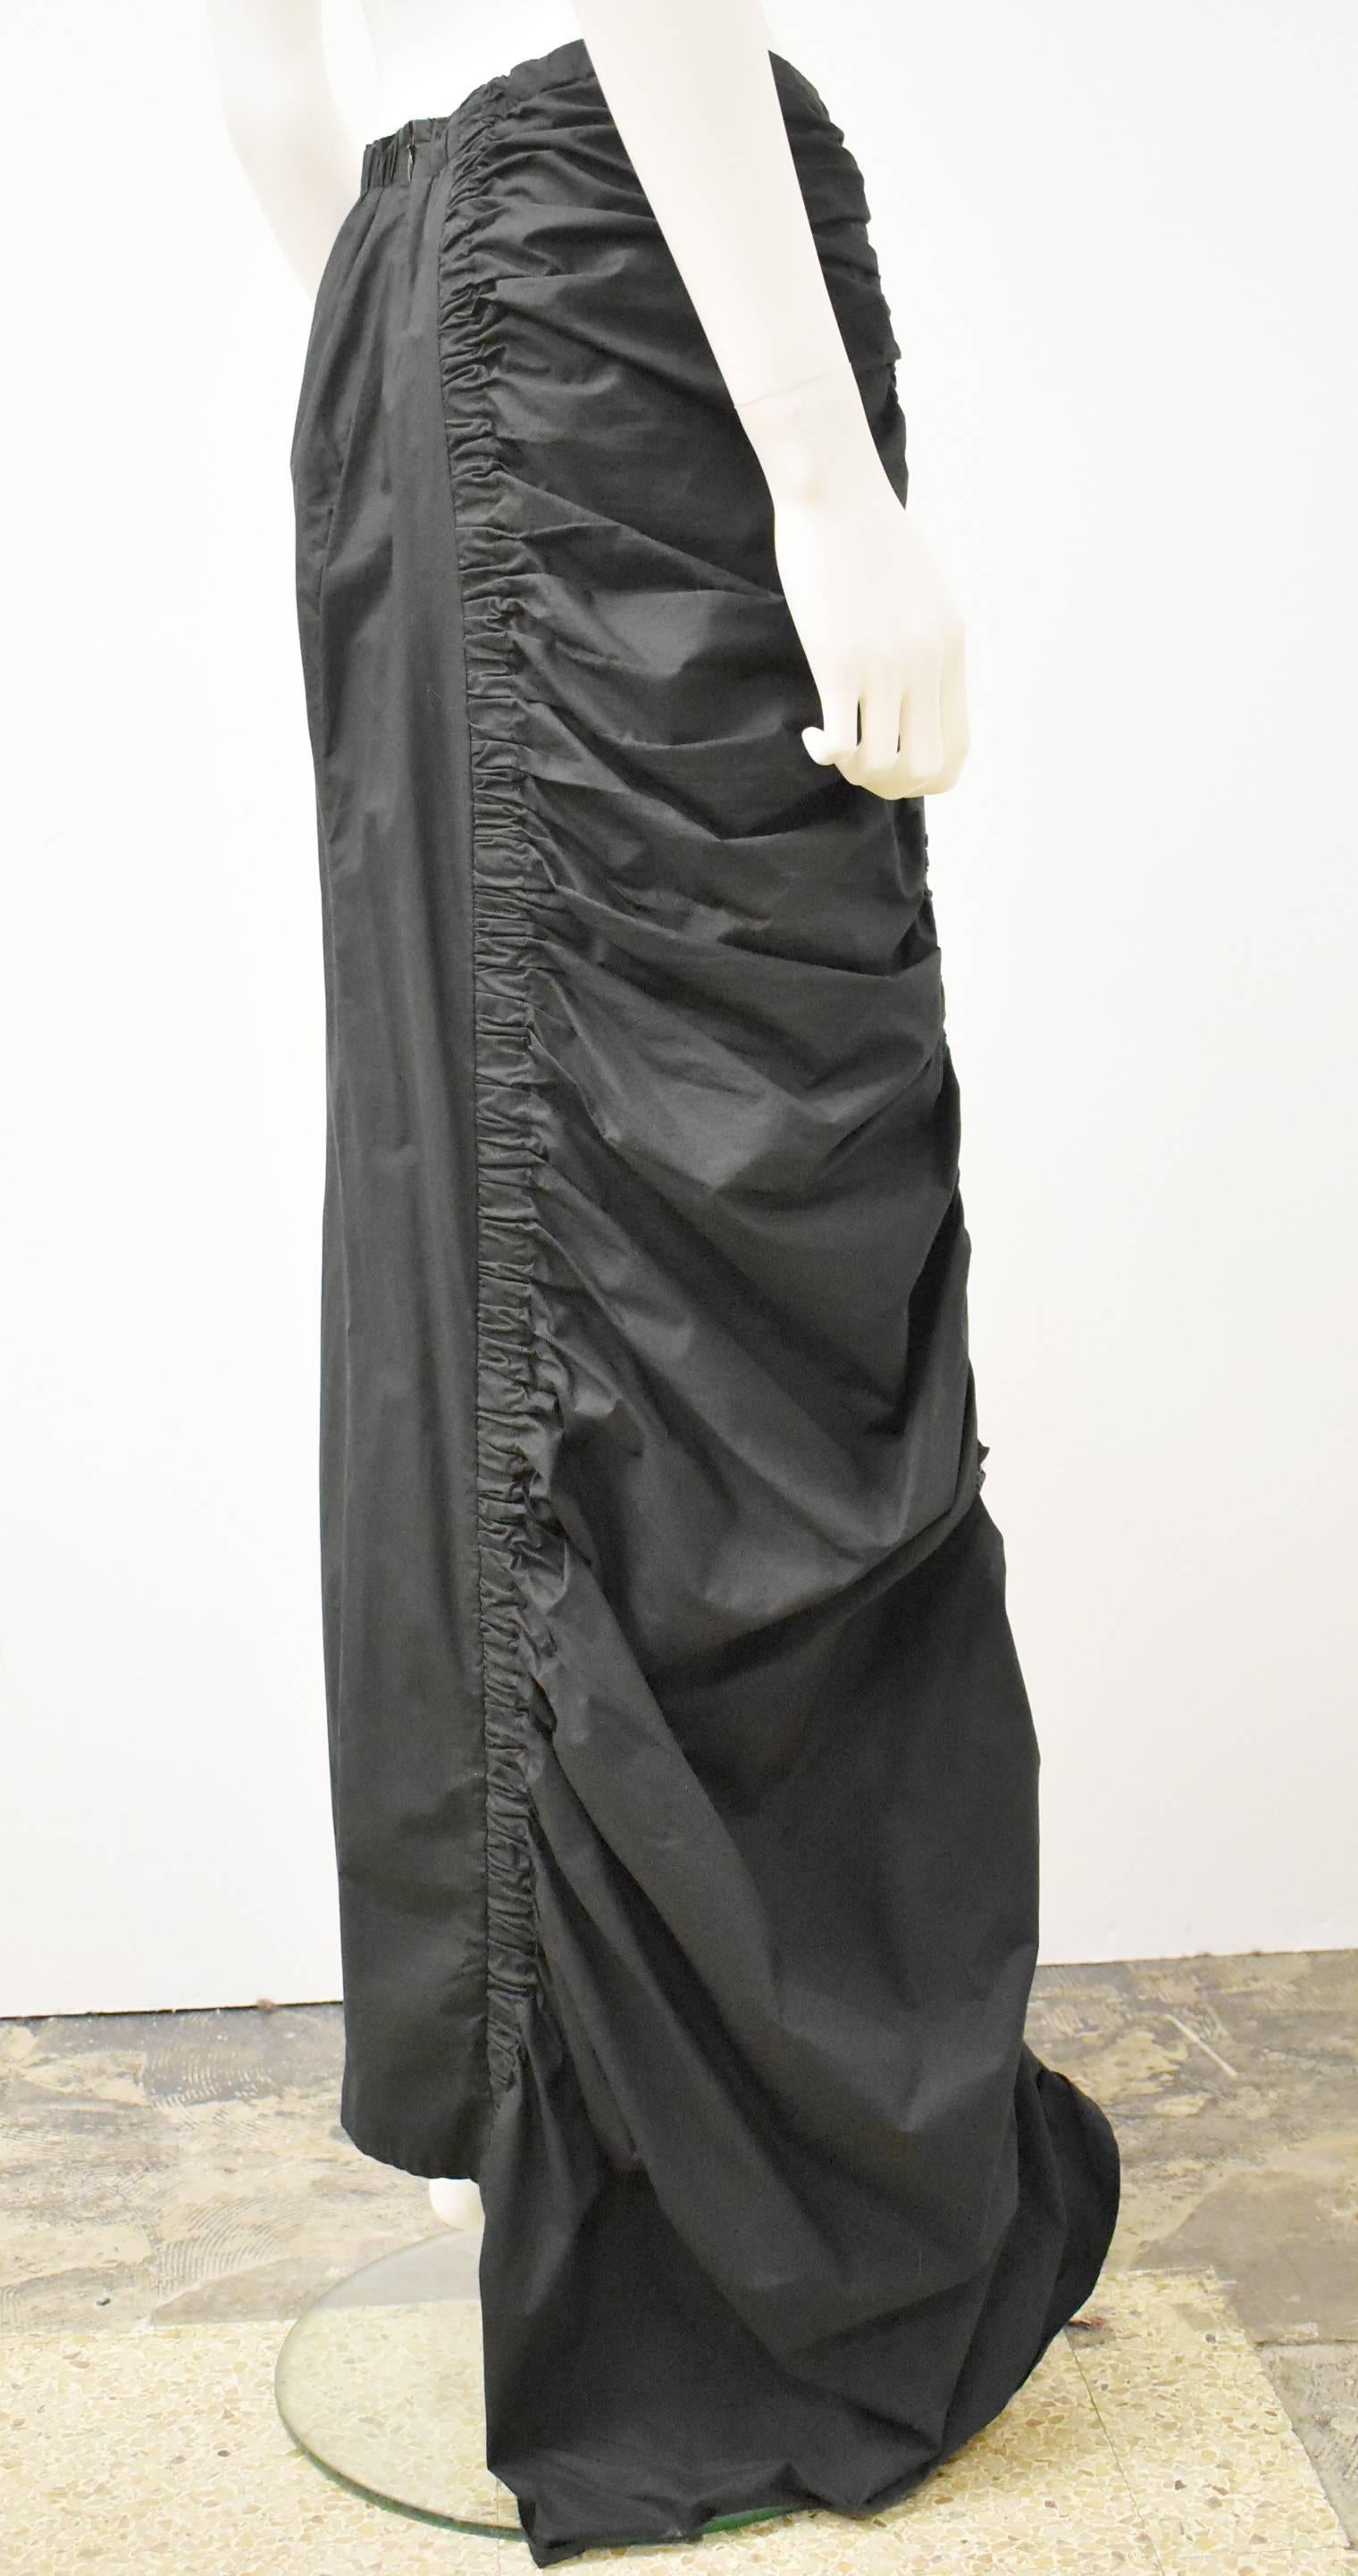 An asymmetric long black skirt from Belgian fashion brand Dries Van Noten. The skirt has an elegant and unusual shape with a simple A-line left side and a contrasting heavily ruched and draped right side and asymmetric hem. The skirt is made from